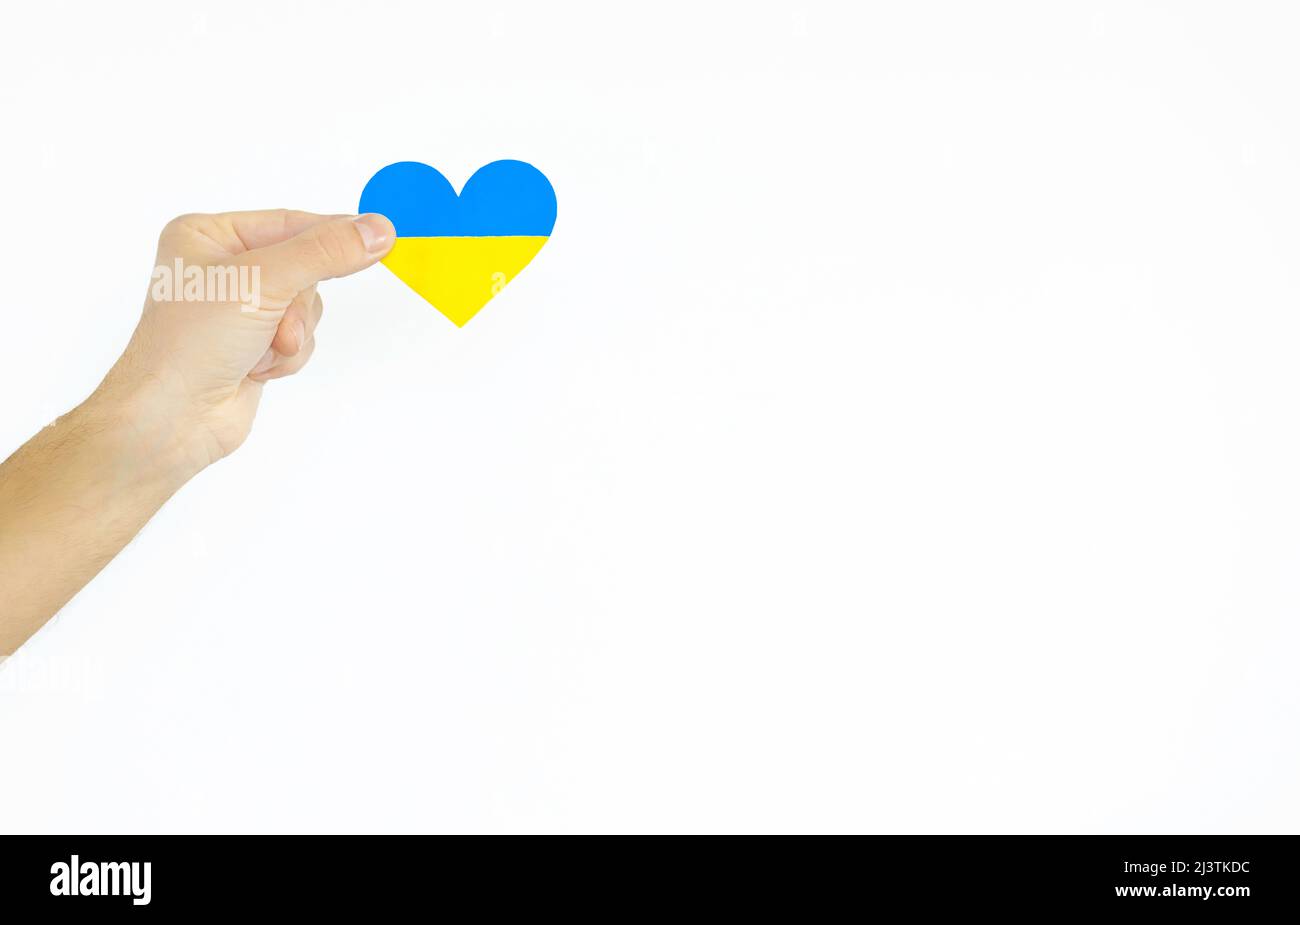 The concept of love for Ukraine. heart in the colors of the flag of Ukraine in men's hands on a white background. Stock Photo